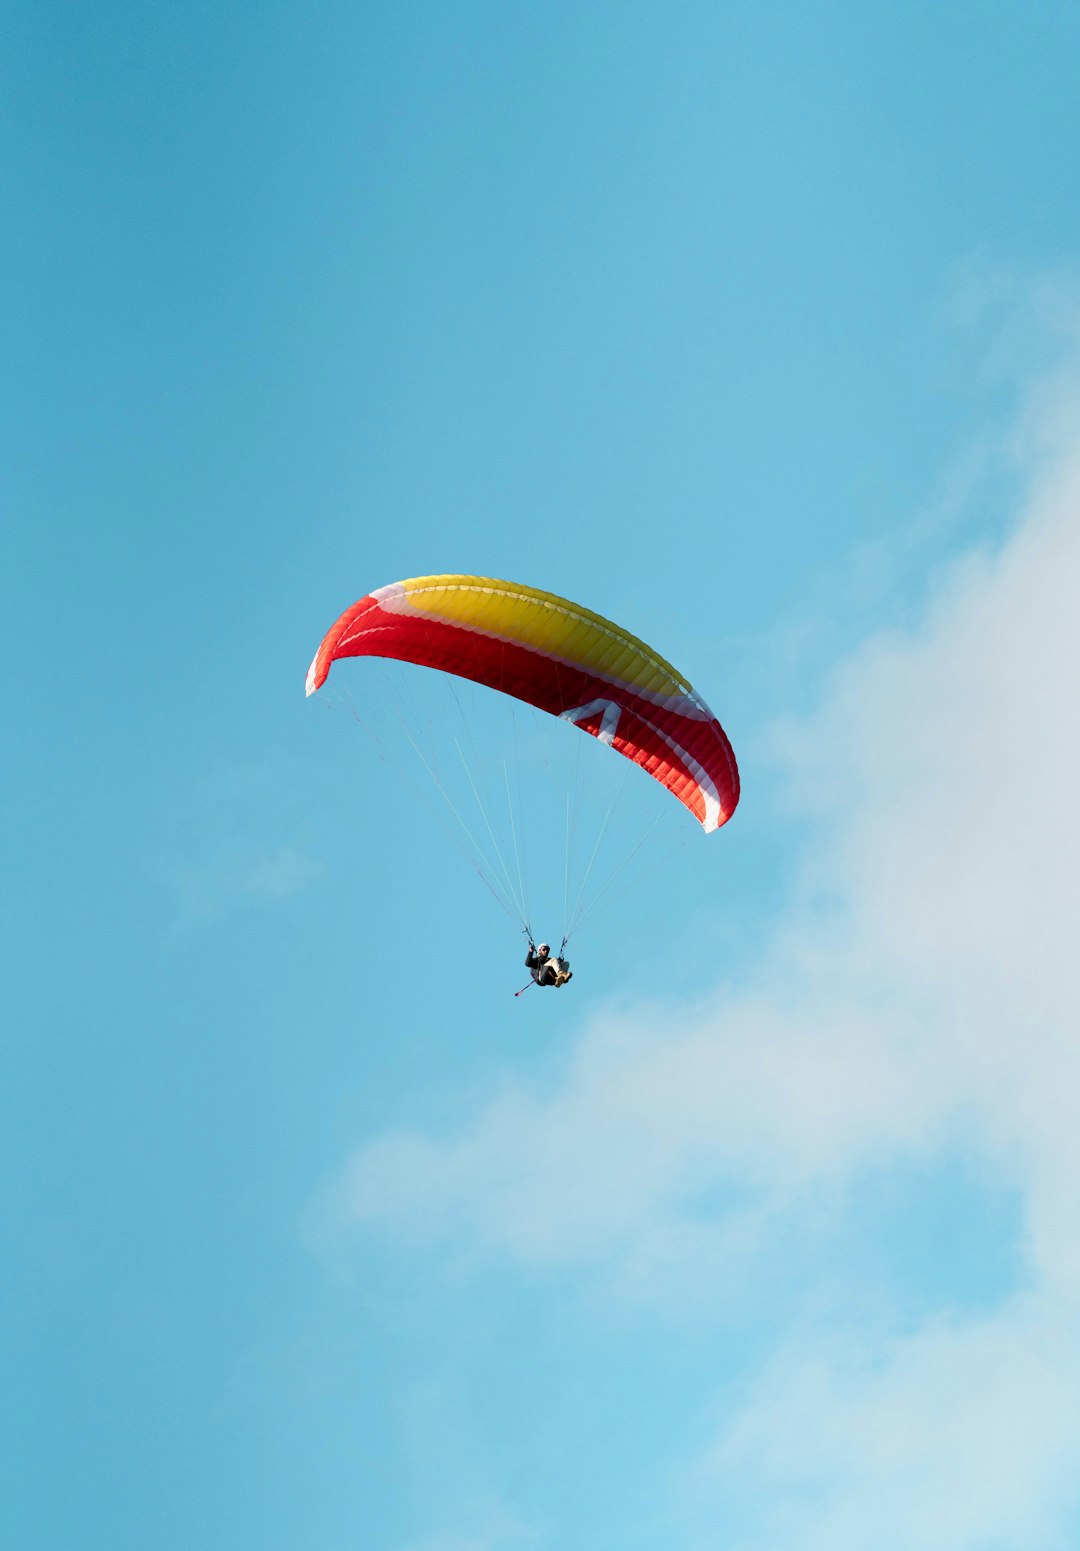 person in red and yellow parachute